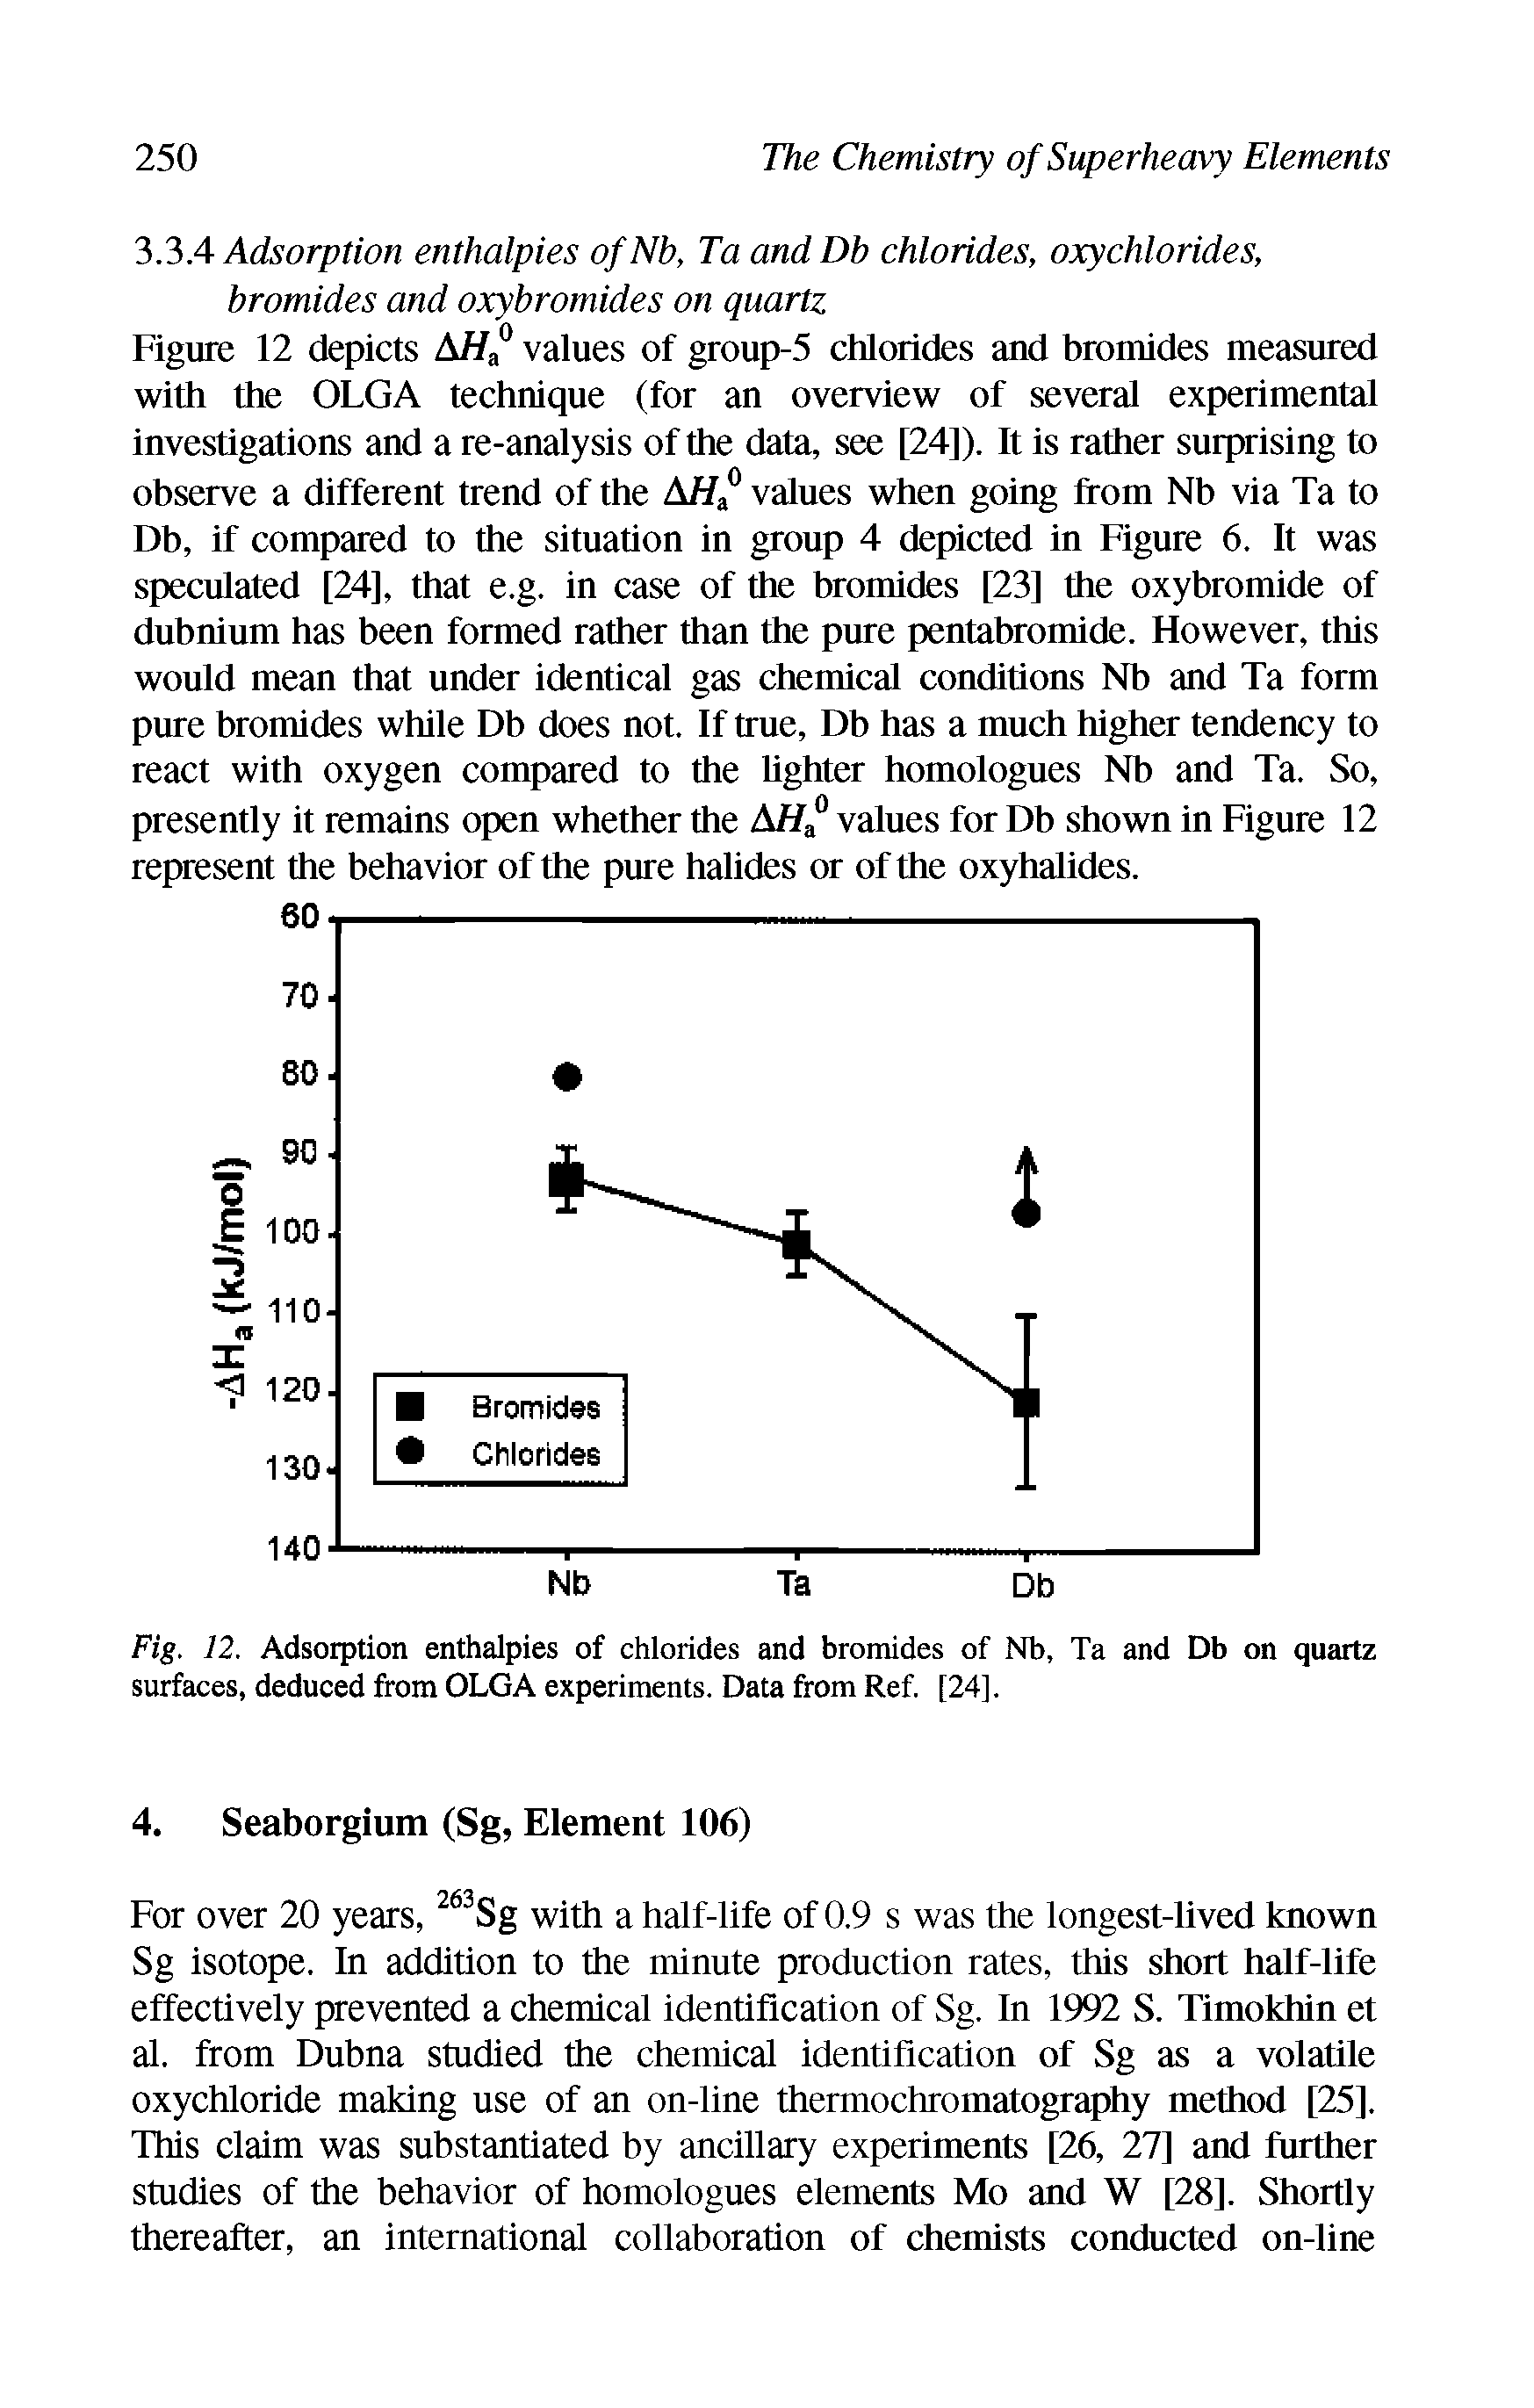 Fig. 12. Adsorption enthalpies of chlorides and bromides of Nb, Ta and Db on quartz surfaces, deduced from OLGA experiments. Data from Ref. [24].